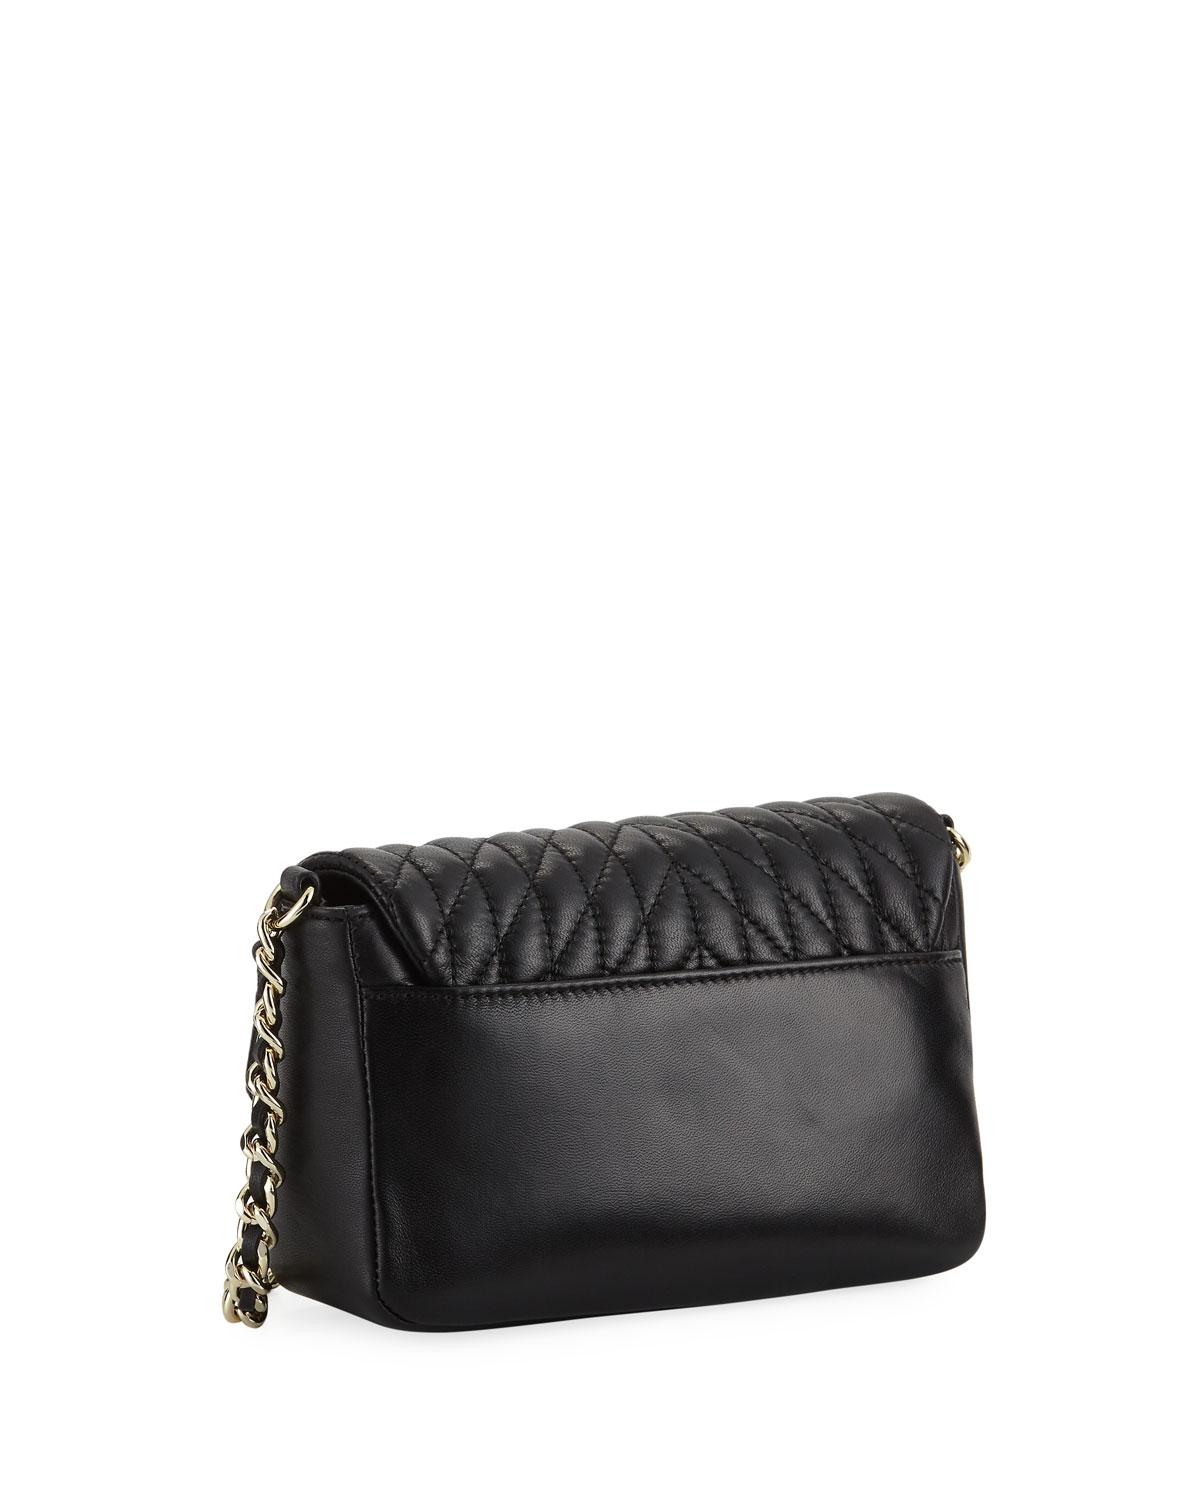 Karl Lagerfeld Agyness Quilted Leather Crossbody Bag in Black/Gold (Black) - Lyst